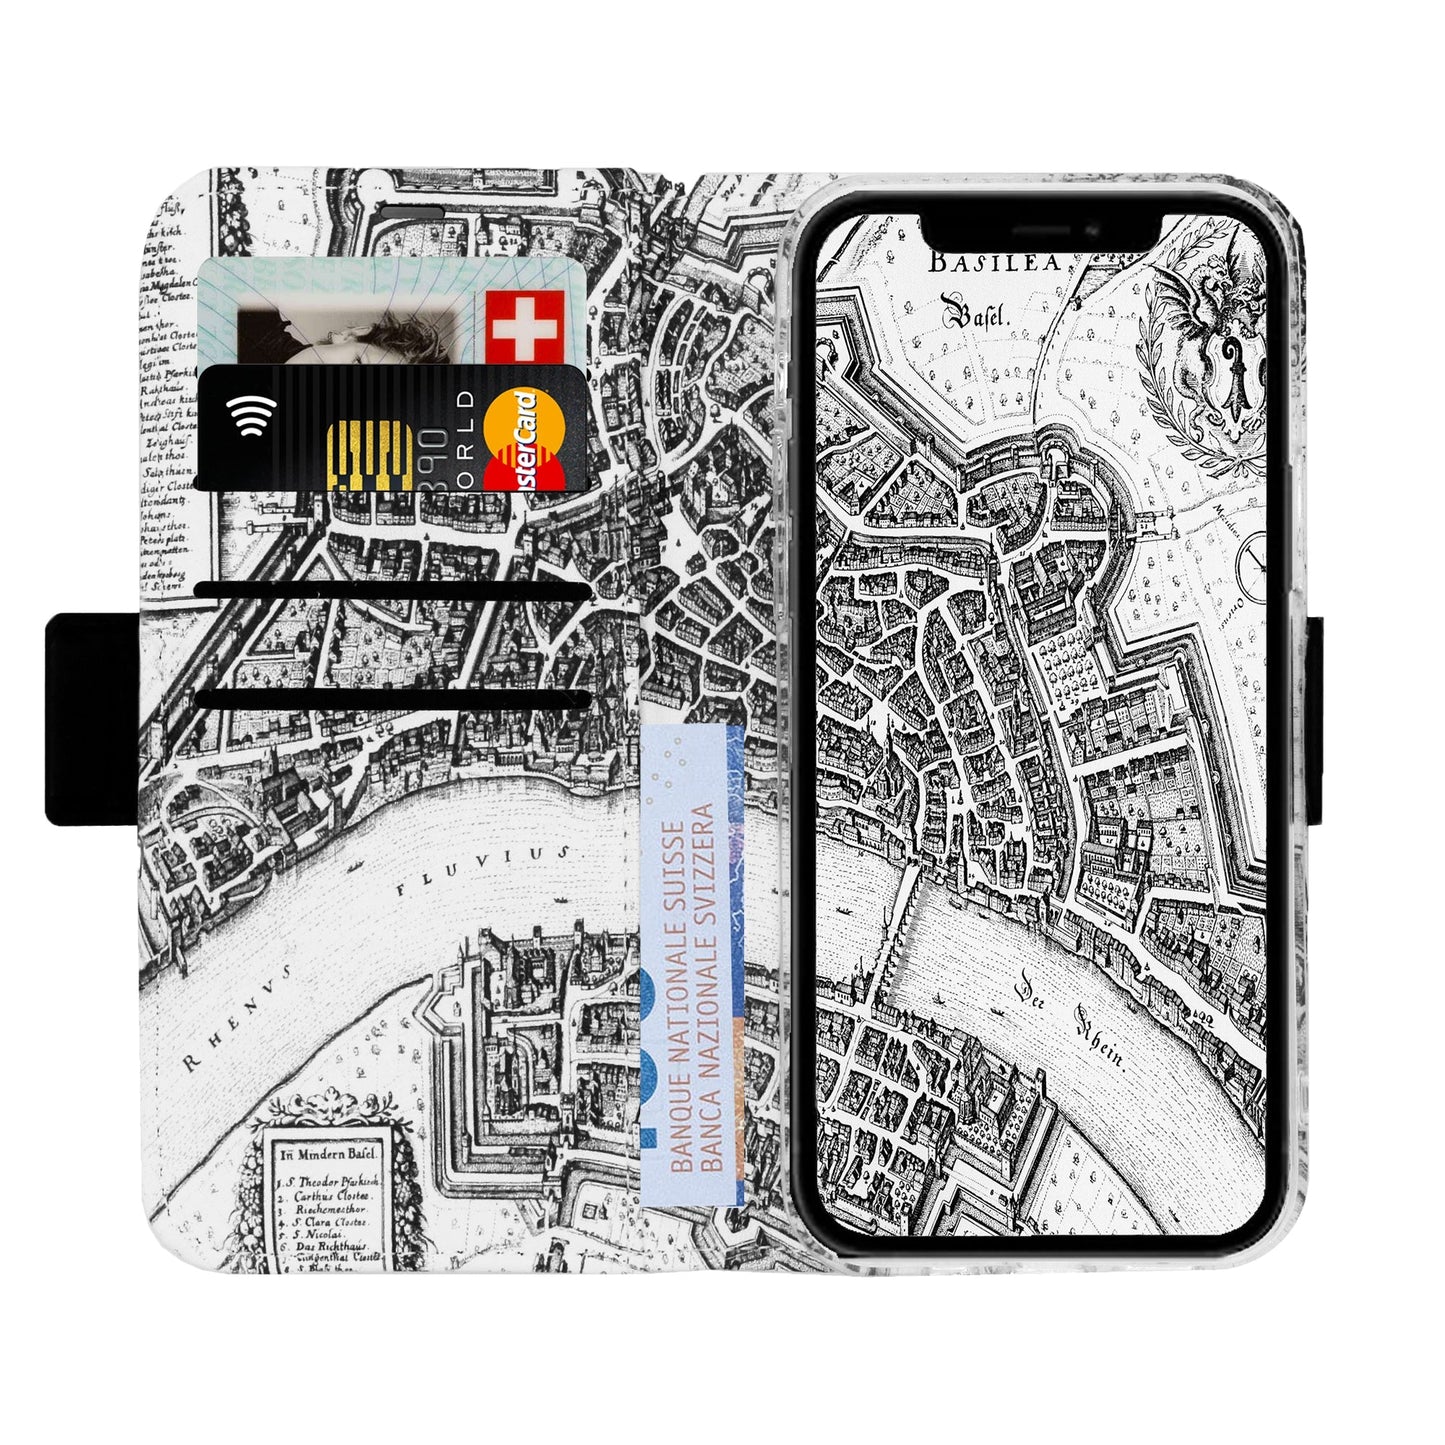 Basel City Spalentor Victor Case for iPhone 14 Pro Max